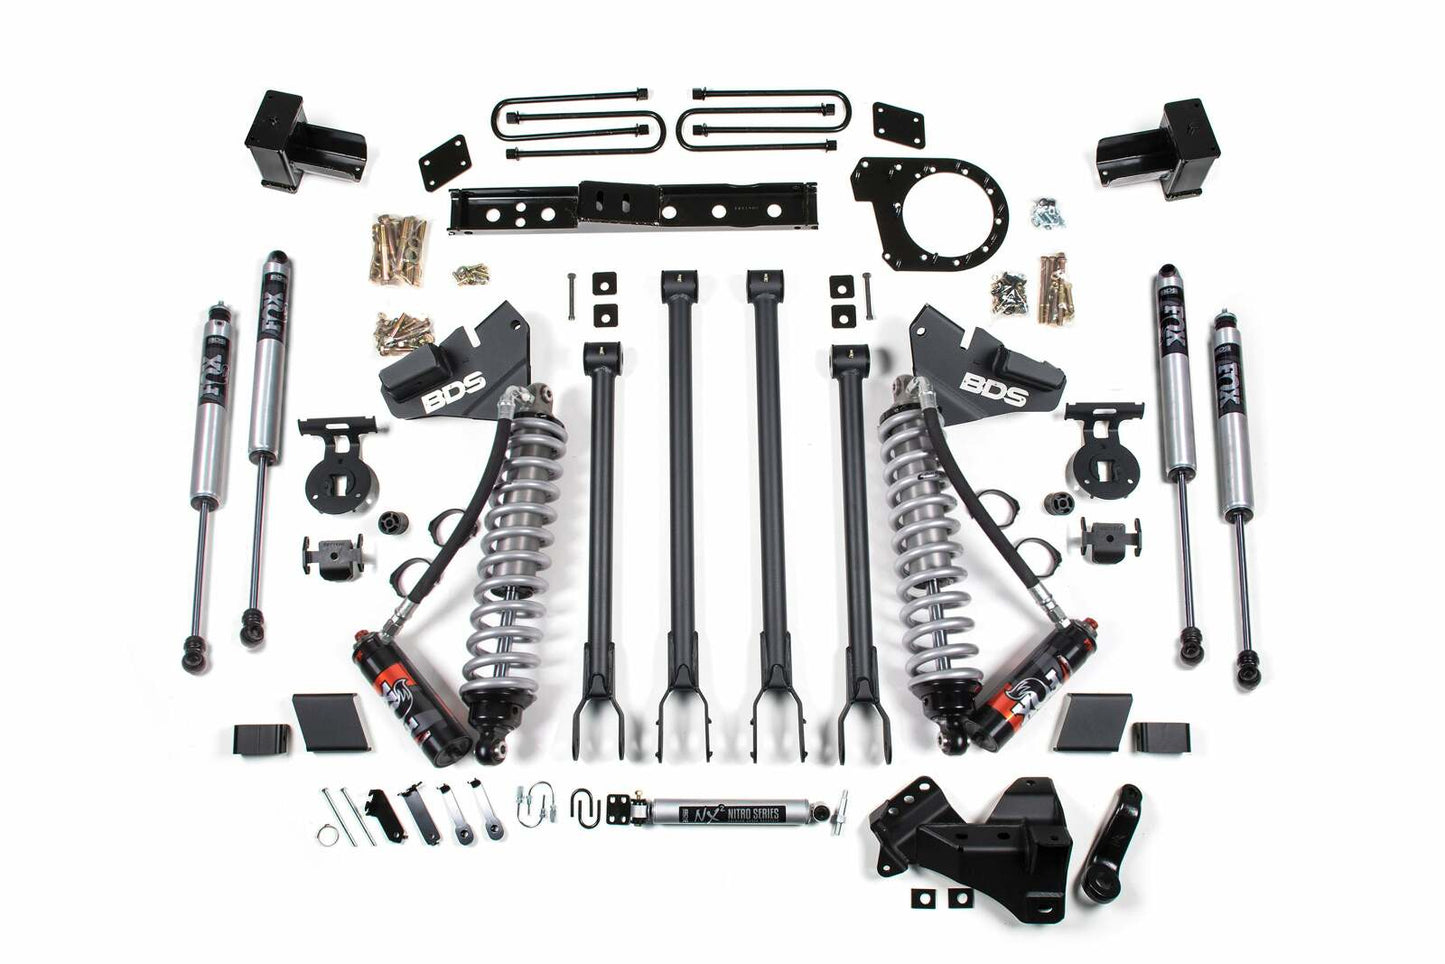 2020-2022 Ford F350 Dually 4wd 6" 4-Link Suspension Lift Kit, 4" Rear, Block, Diesel - Fox 2.5 PES C/O Front, Fox 2.5 PES Aux Front, Fox 2.5 PES Rear